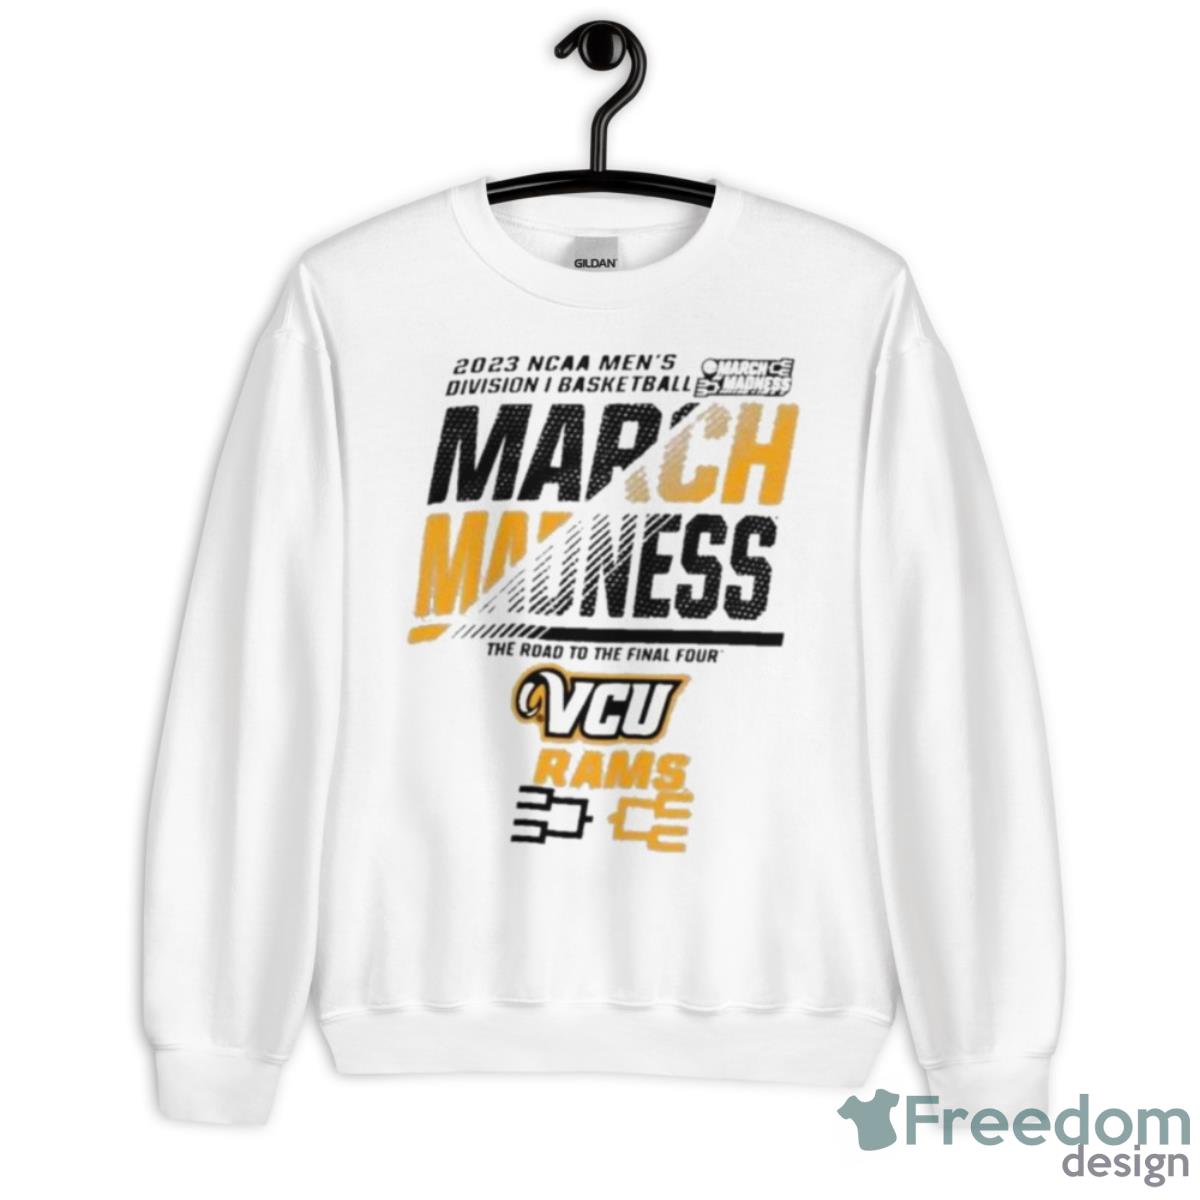 VCU Rams Men’s Basketball 2023 NCAA March Madness The Road To Final Four Shirt